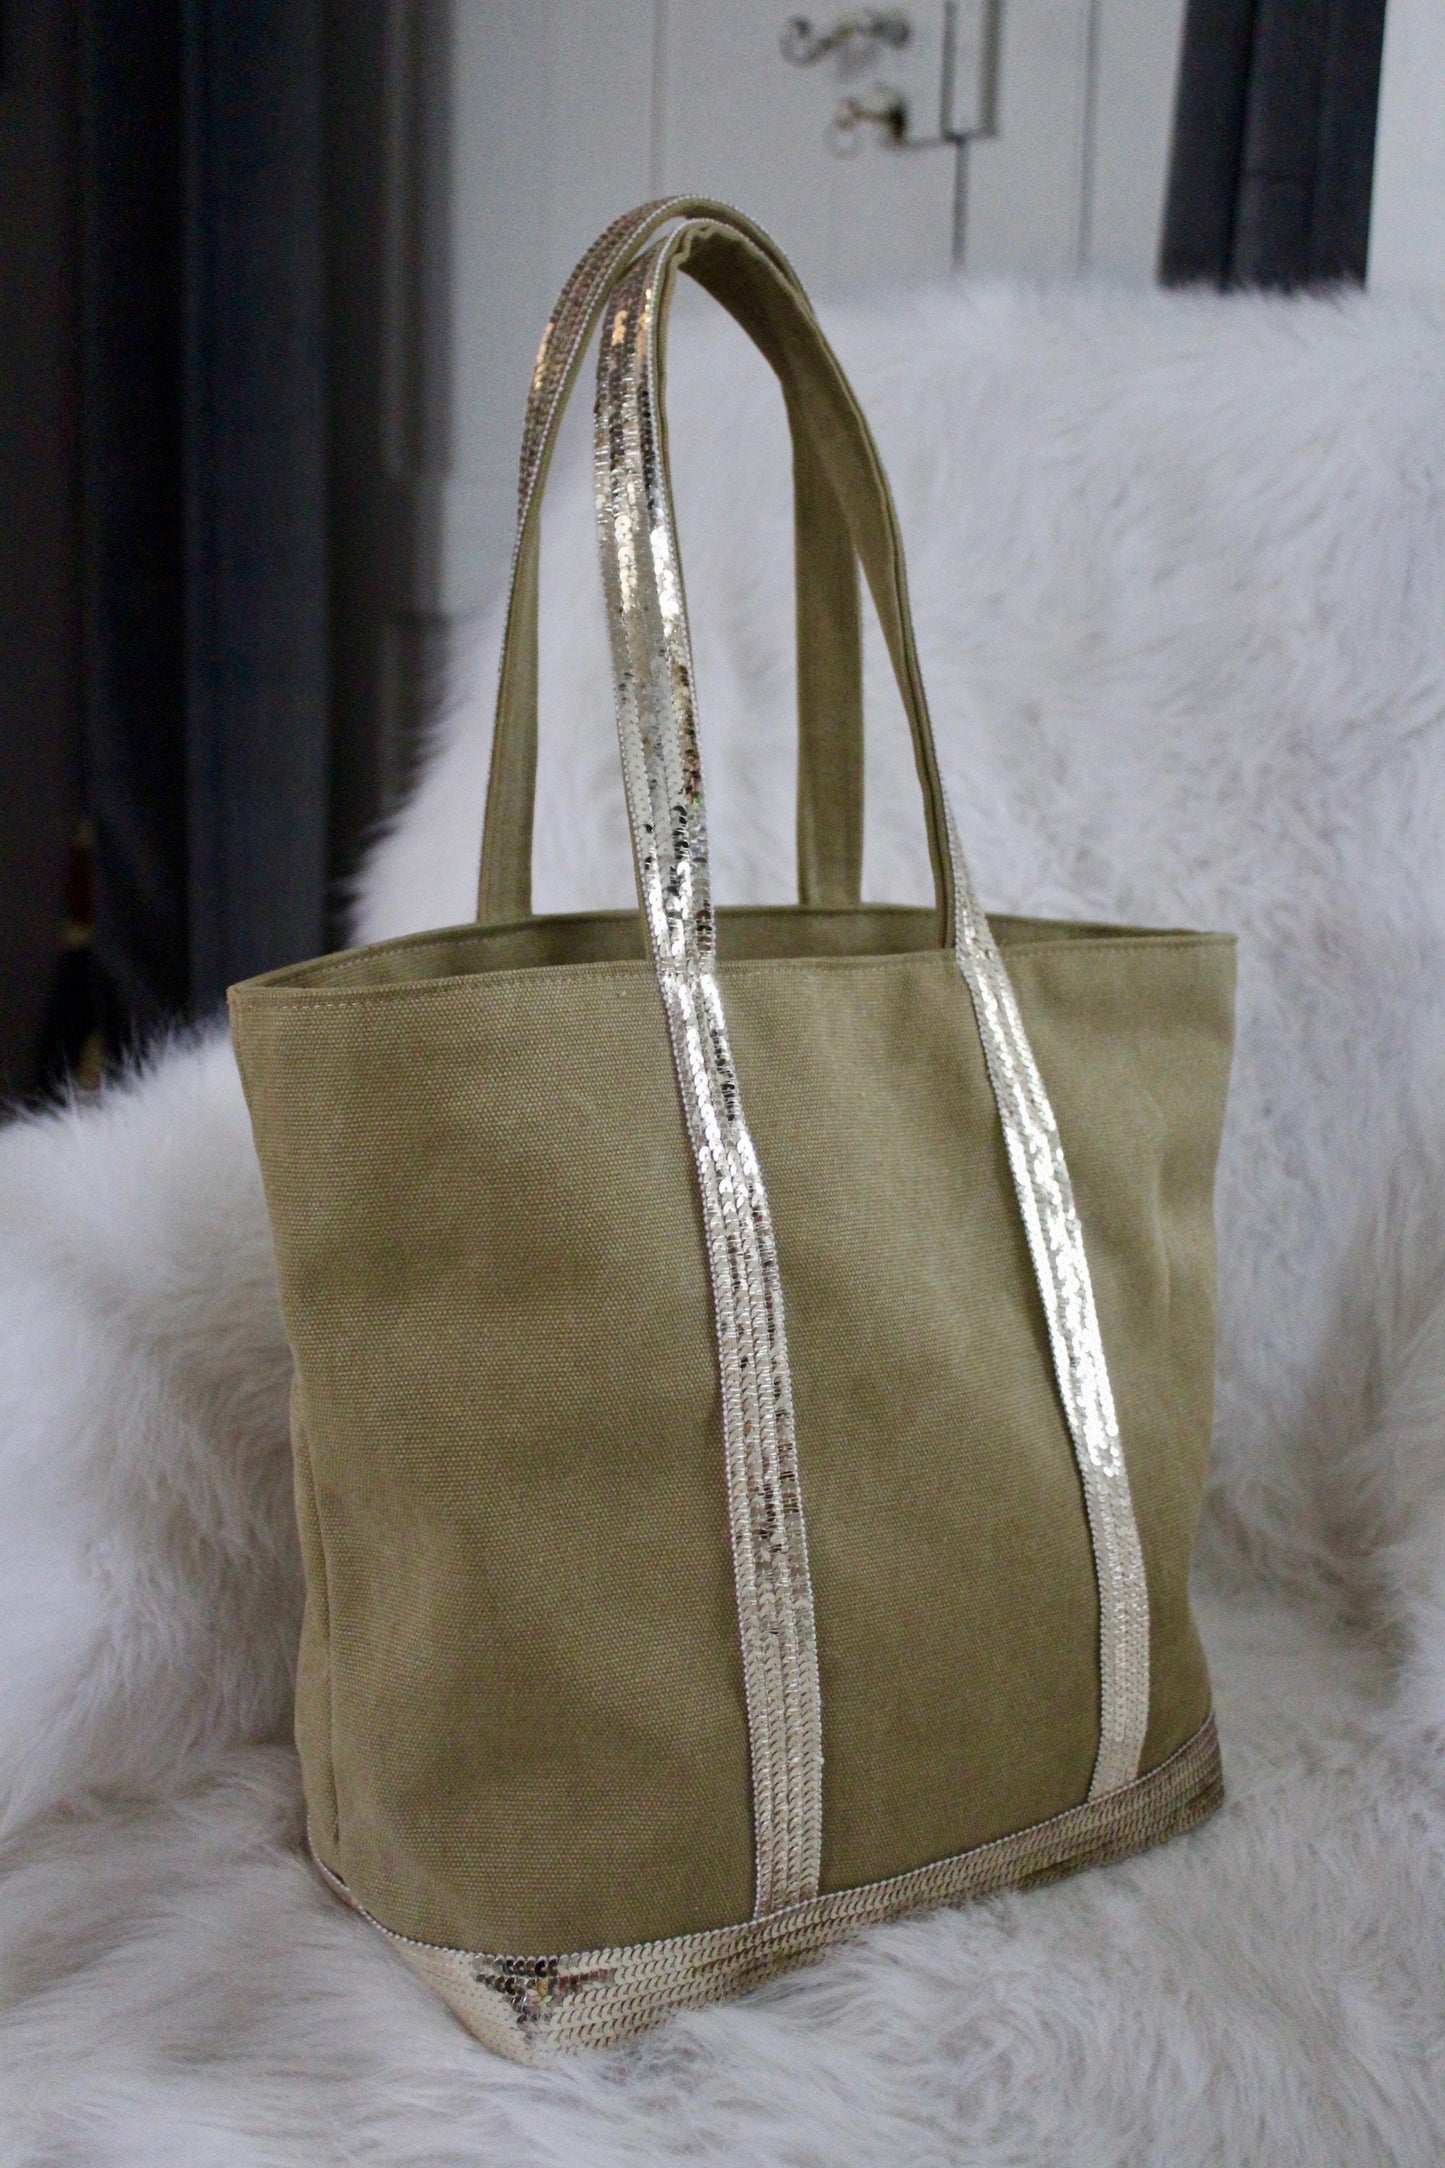 Khaki cotton tote bag with gold sequins